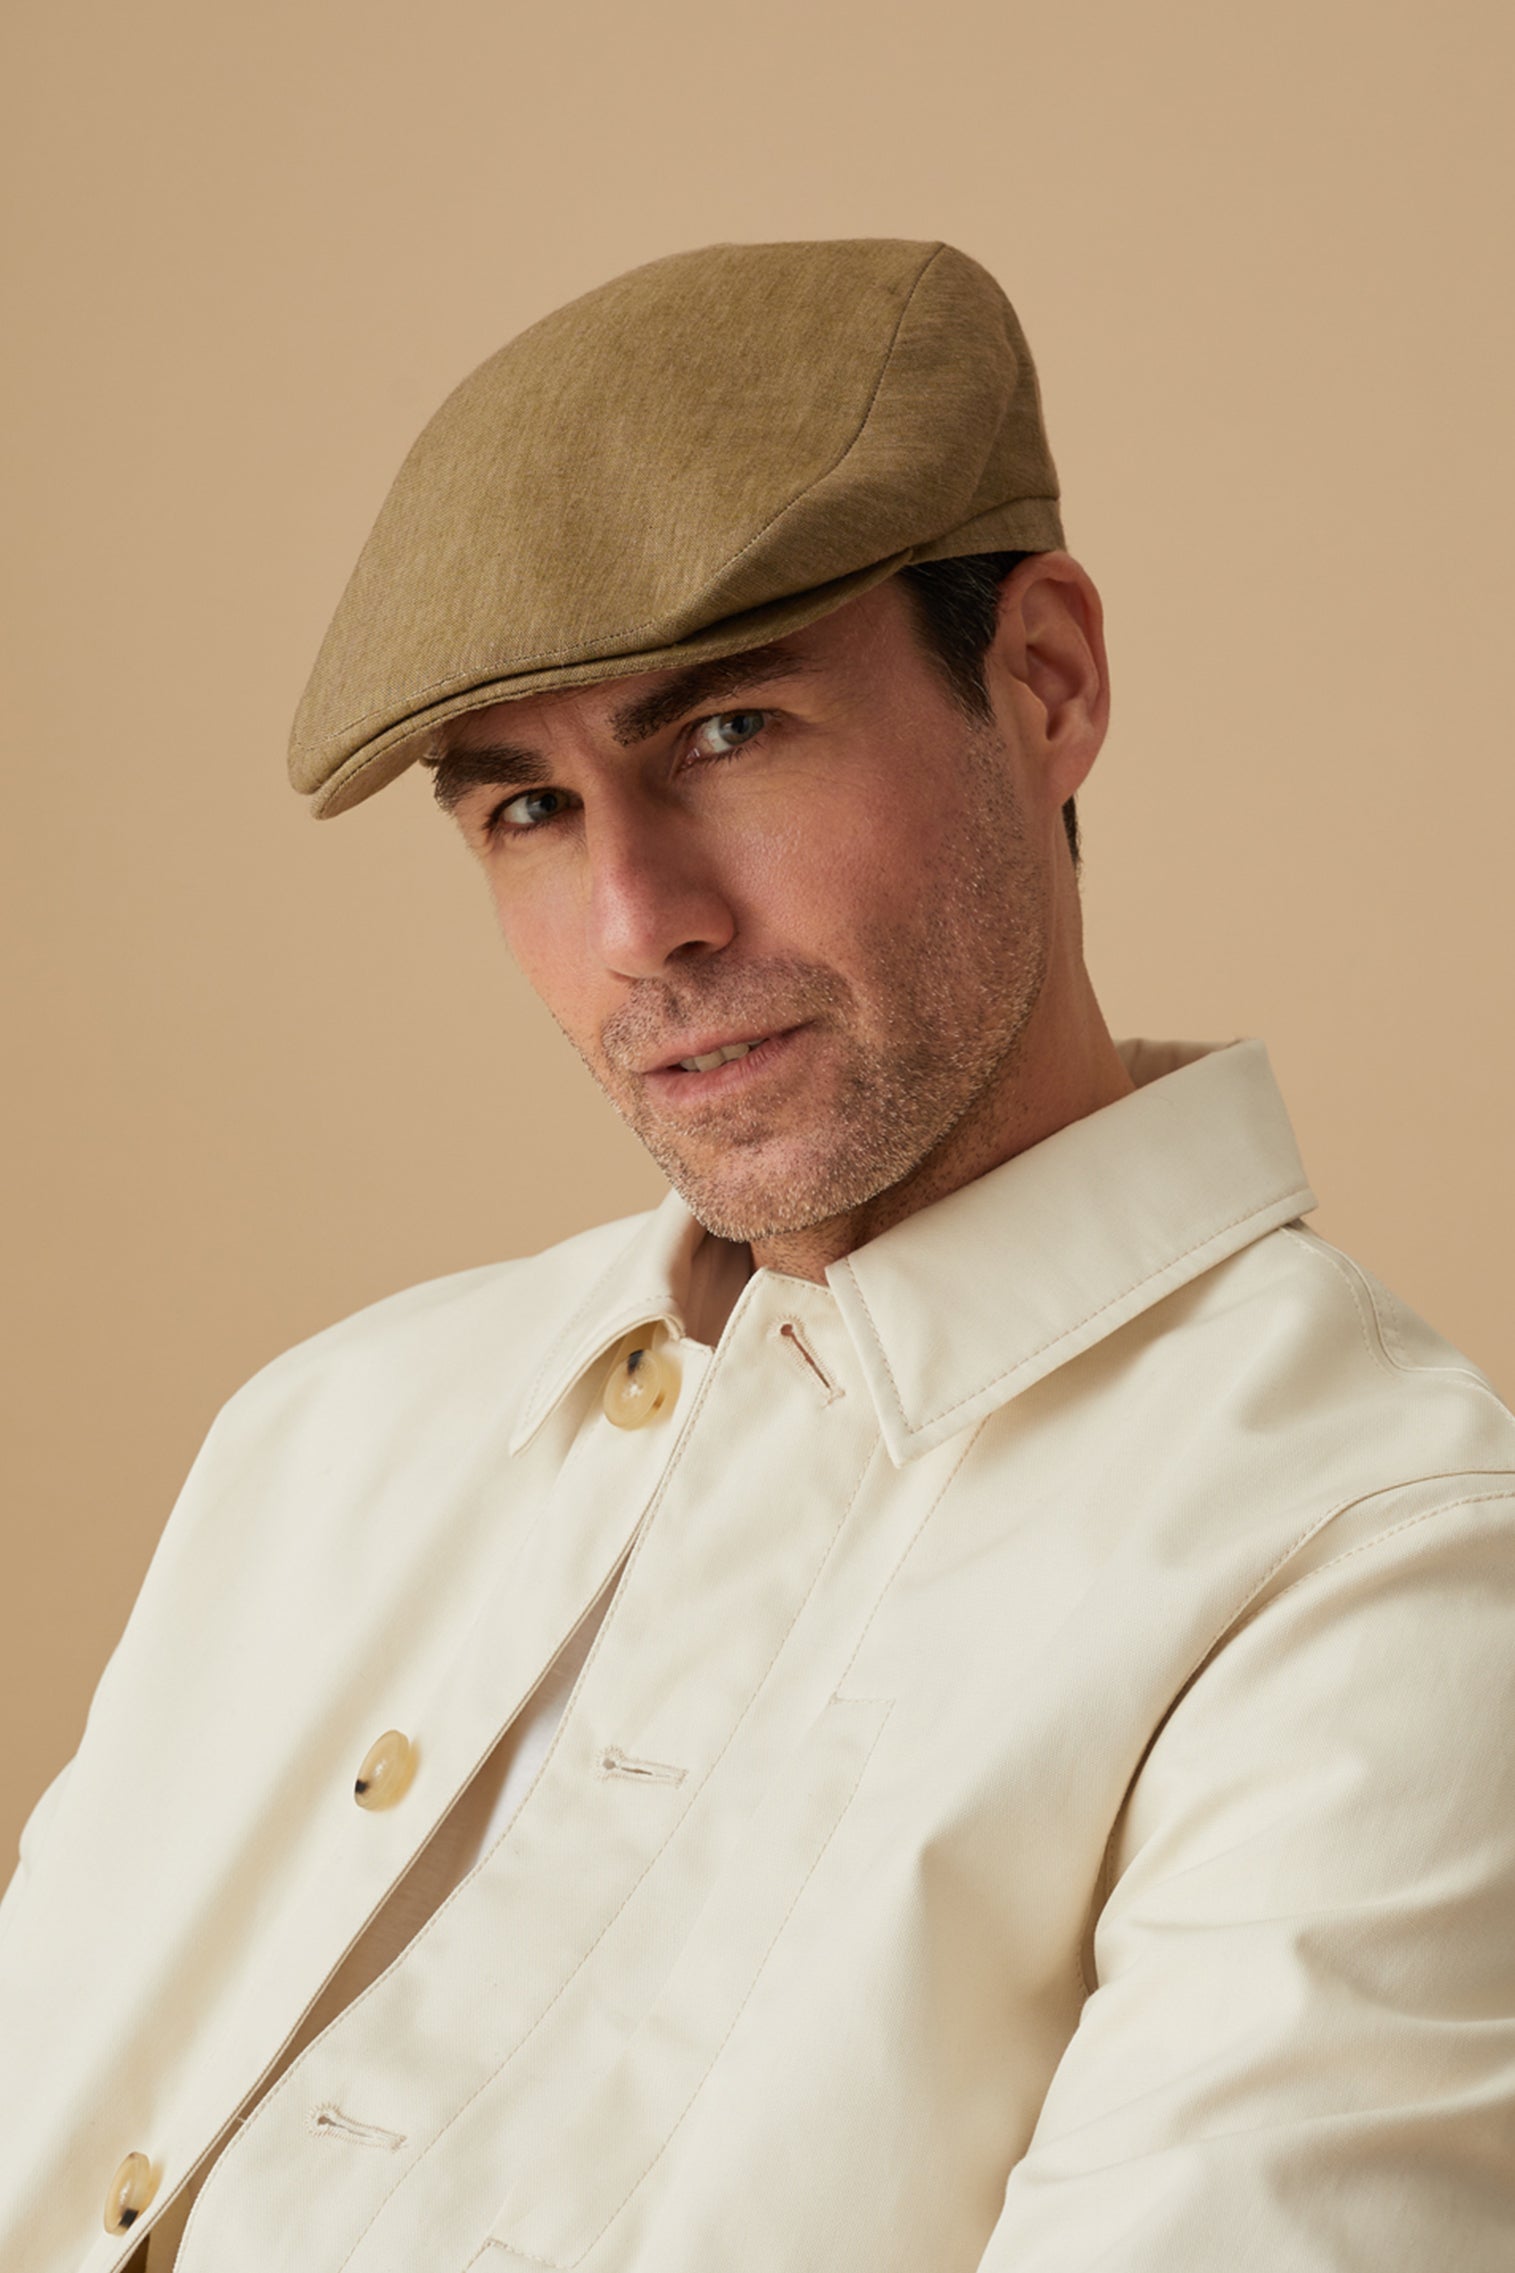 New Season Hat Collection - Lock & Co. Hatters